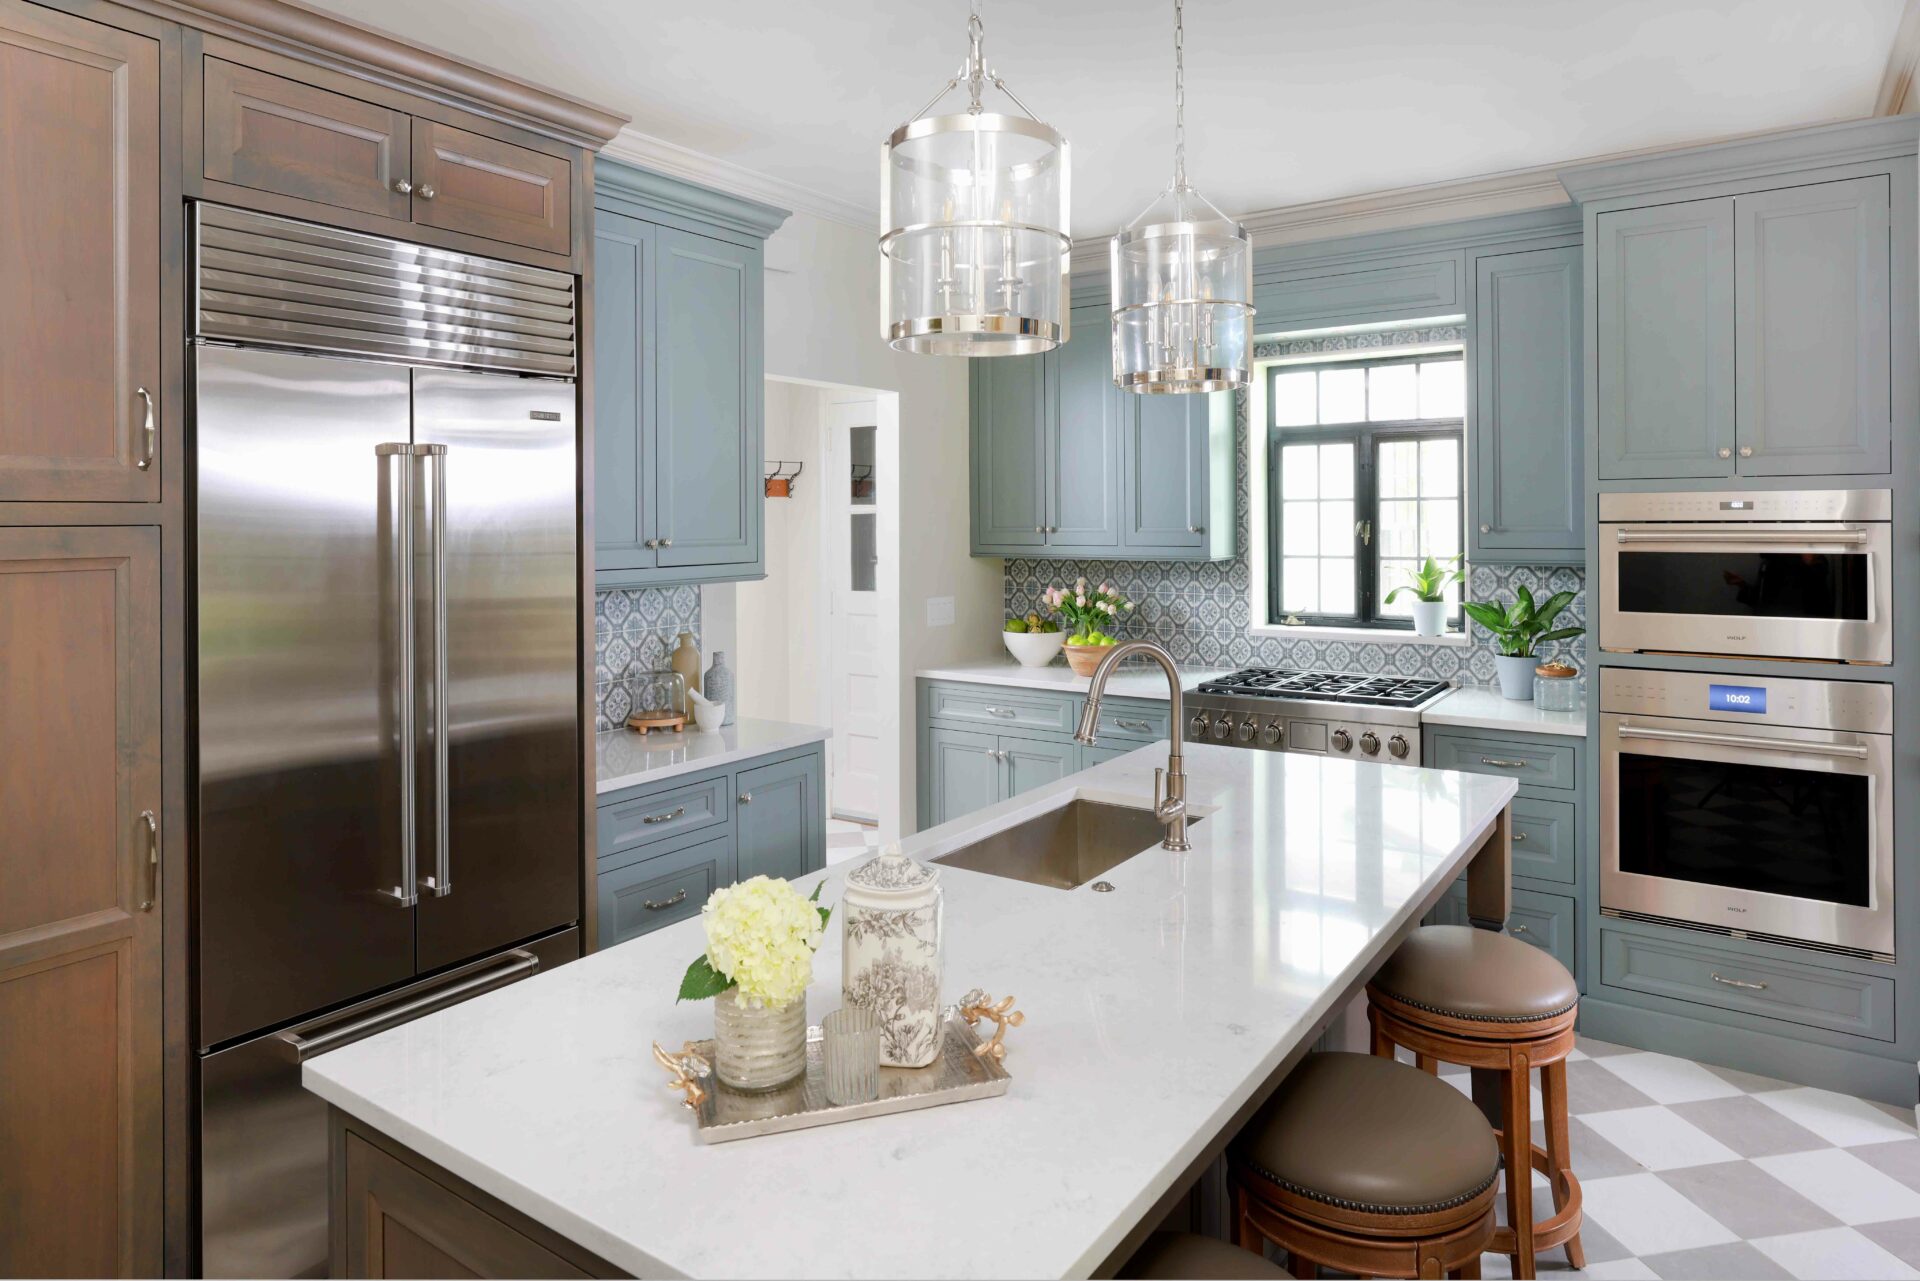 Gray painted kitchen cabinets with stained wood cabinets in a vintage inspired kitchen